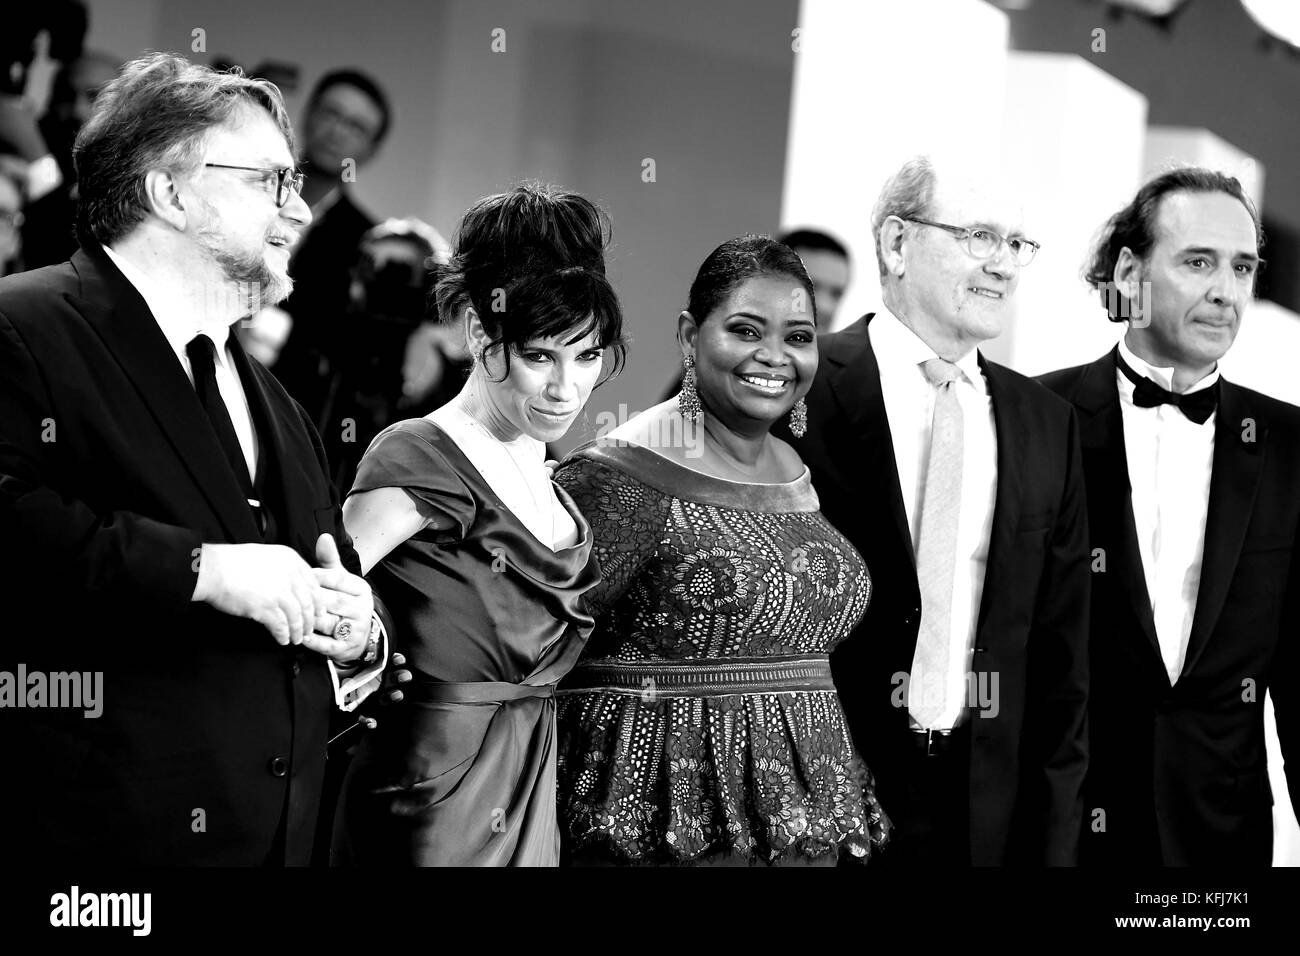 Guillermo del Toro, Sally Hawkins, Octavia Spencer, Richard Jenkins and Alexandre Desplat attend the premiere of The Shape Of Water. © Paul Treadway Stock Photo